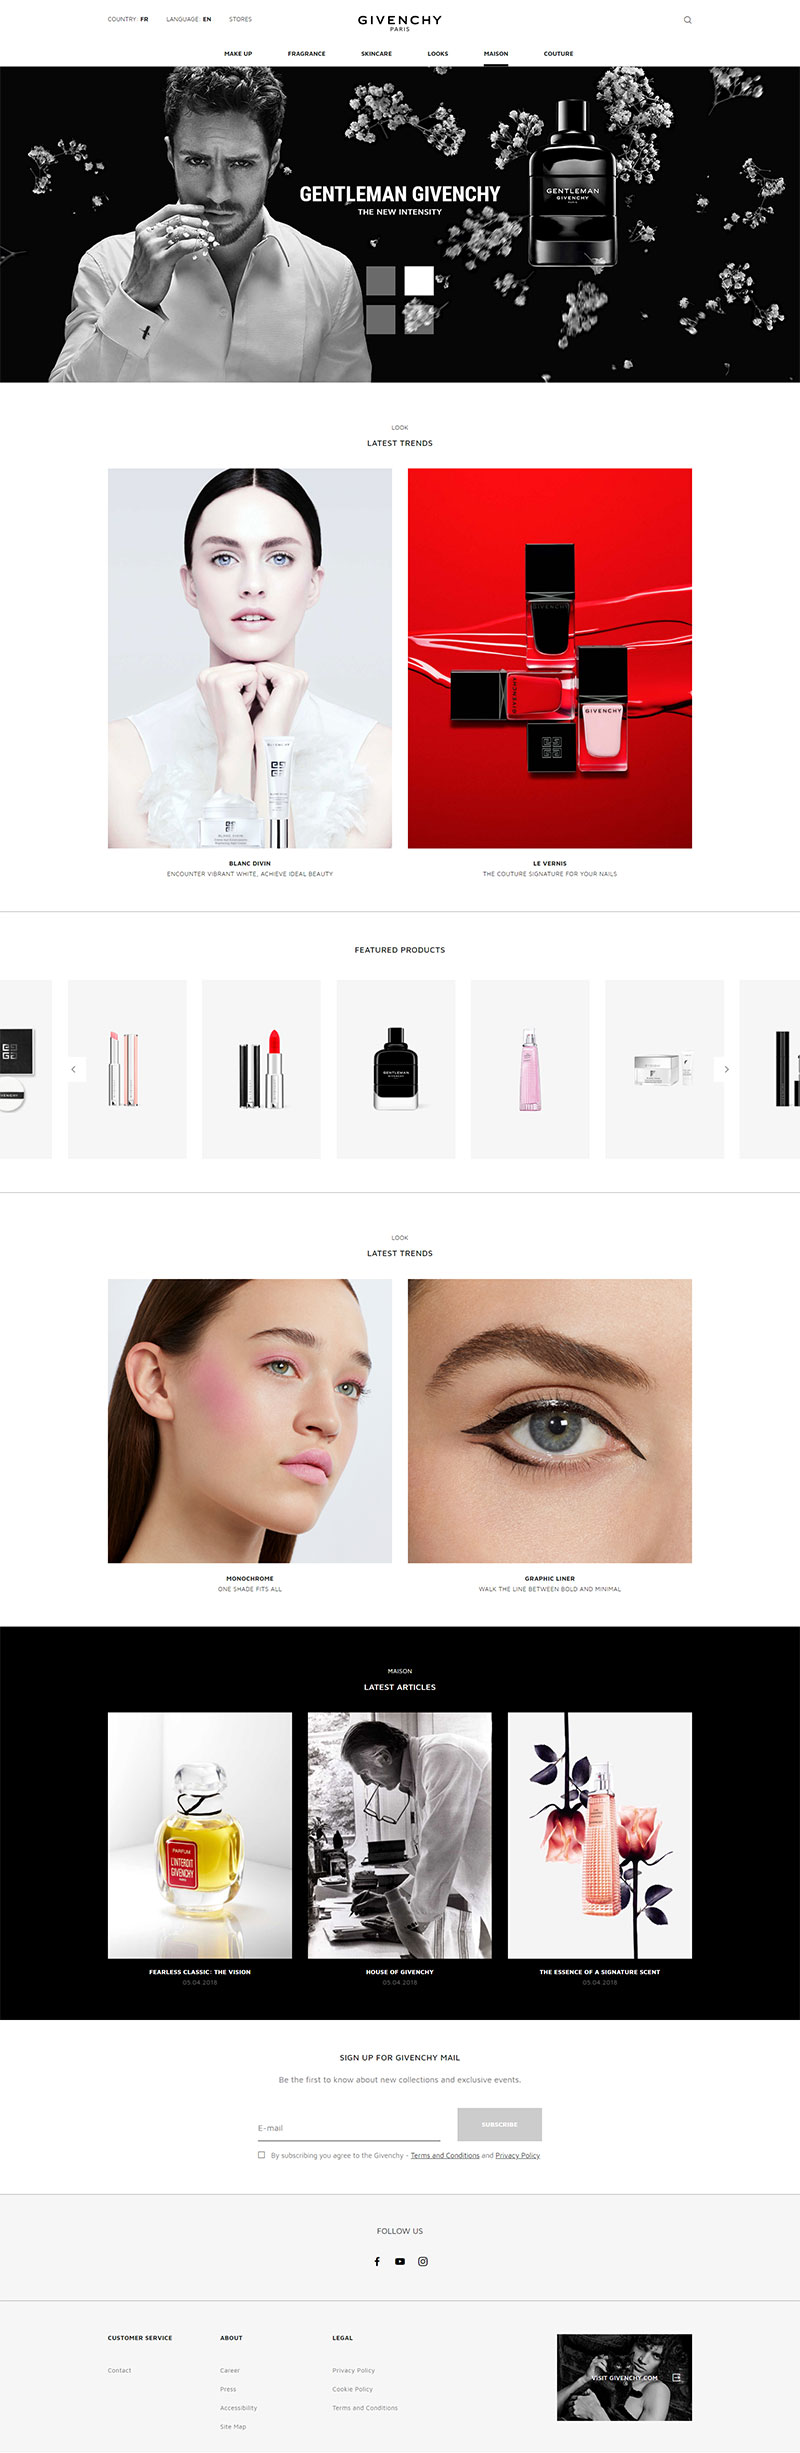 givenchy us website